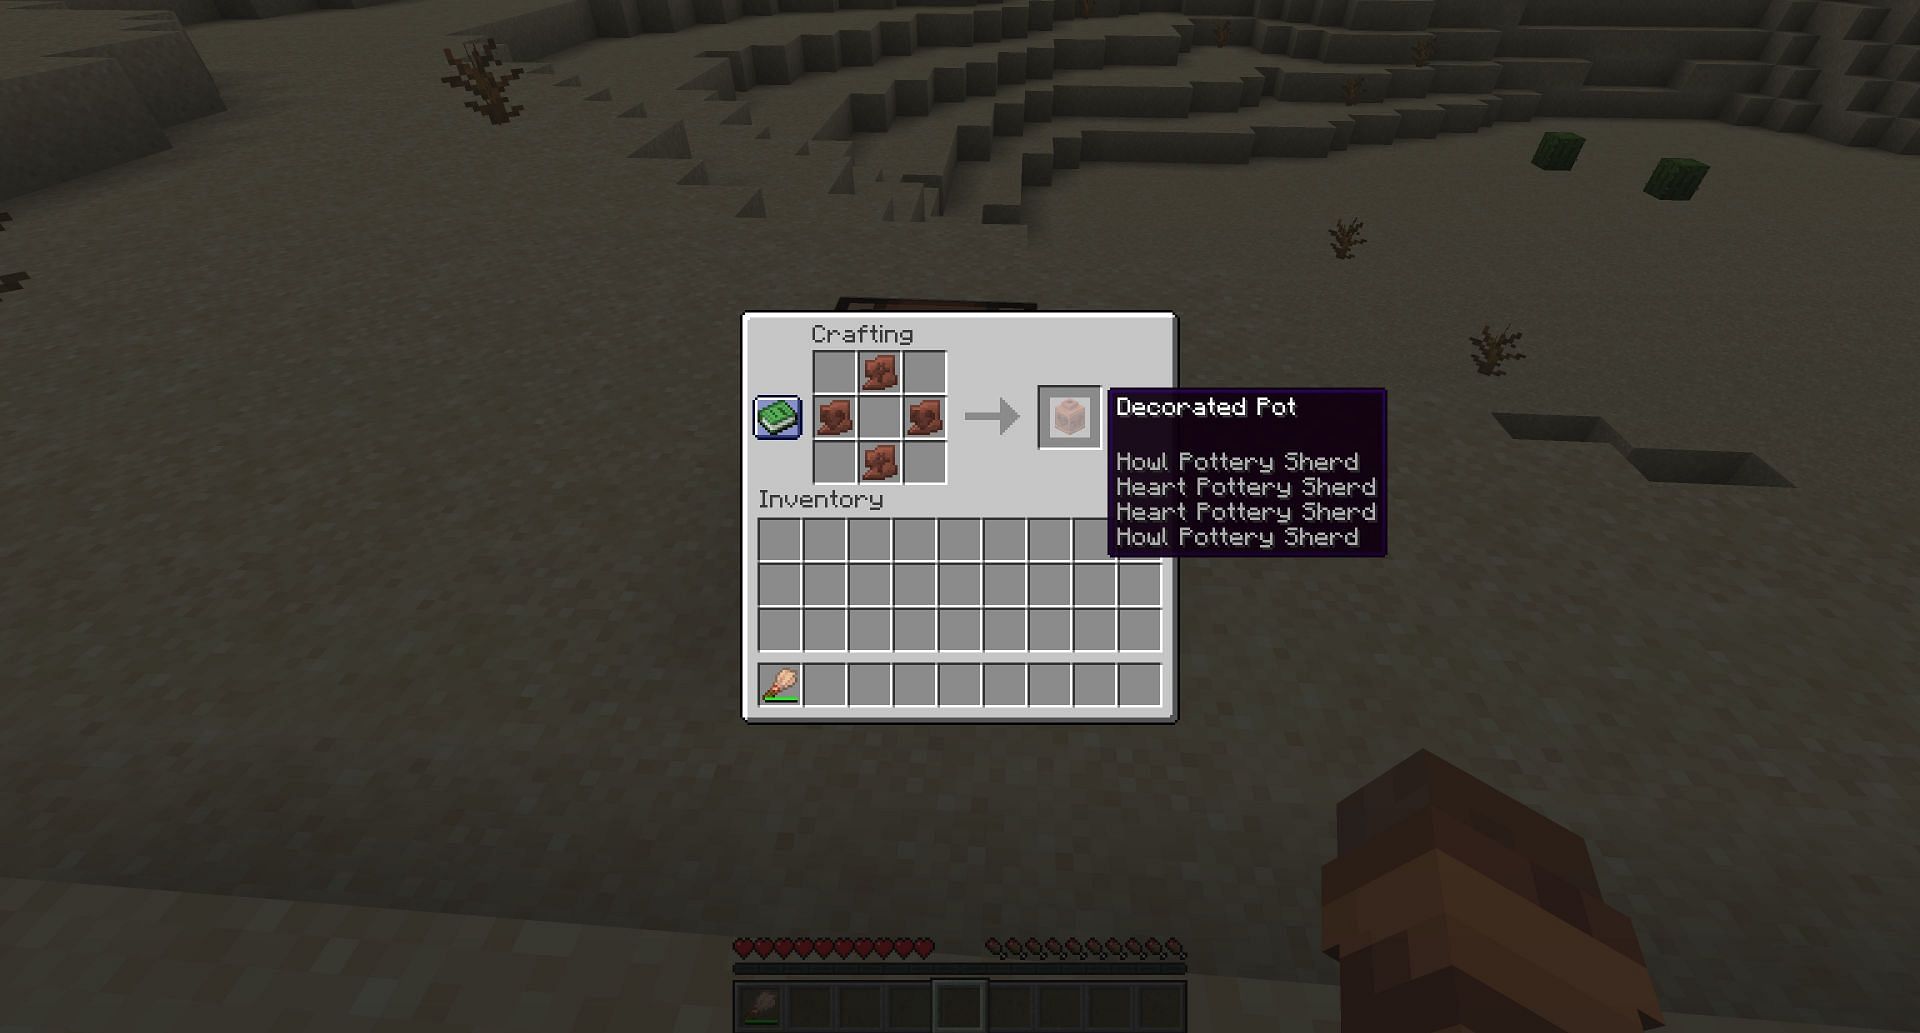 Archeologists use &quot;pottery sherds&quot; to separate them from other shards (Image via Mojang)